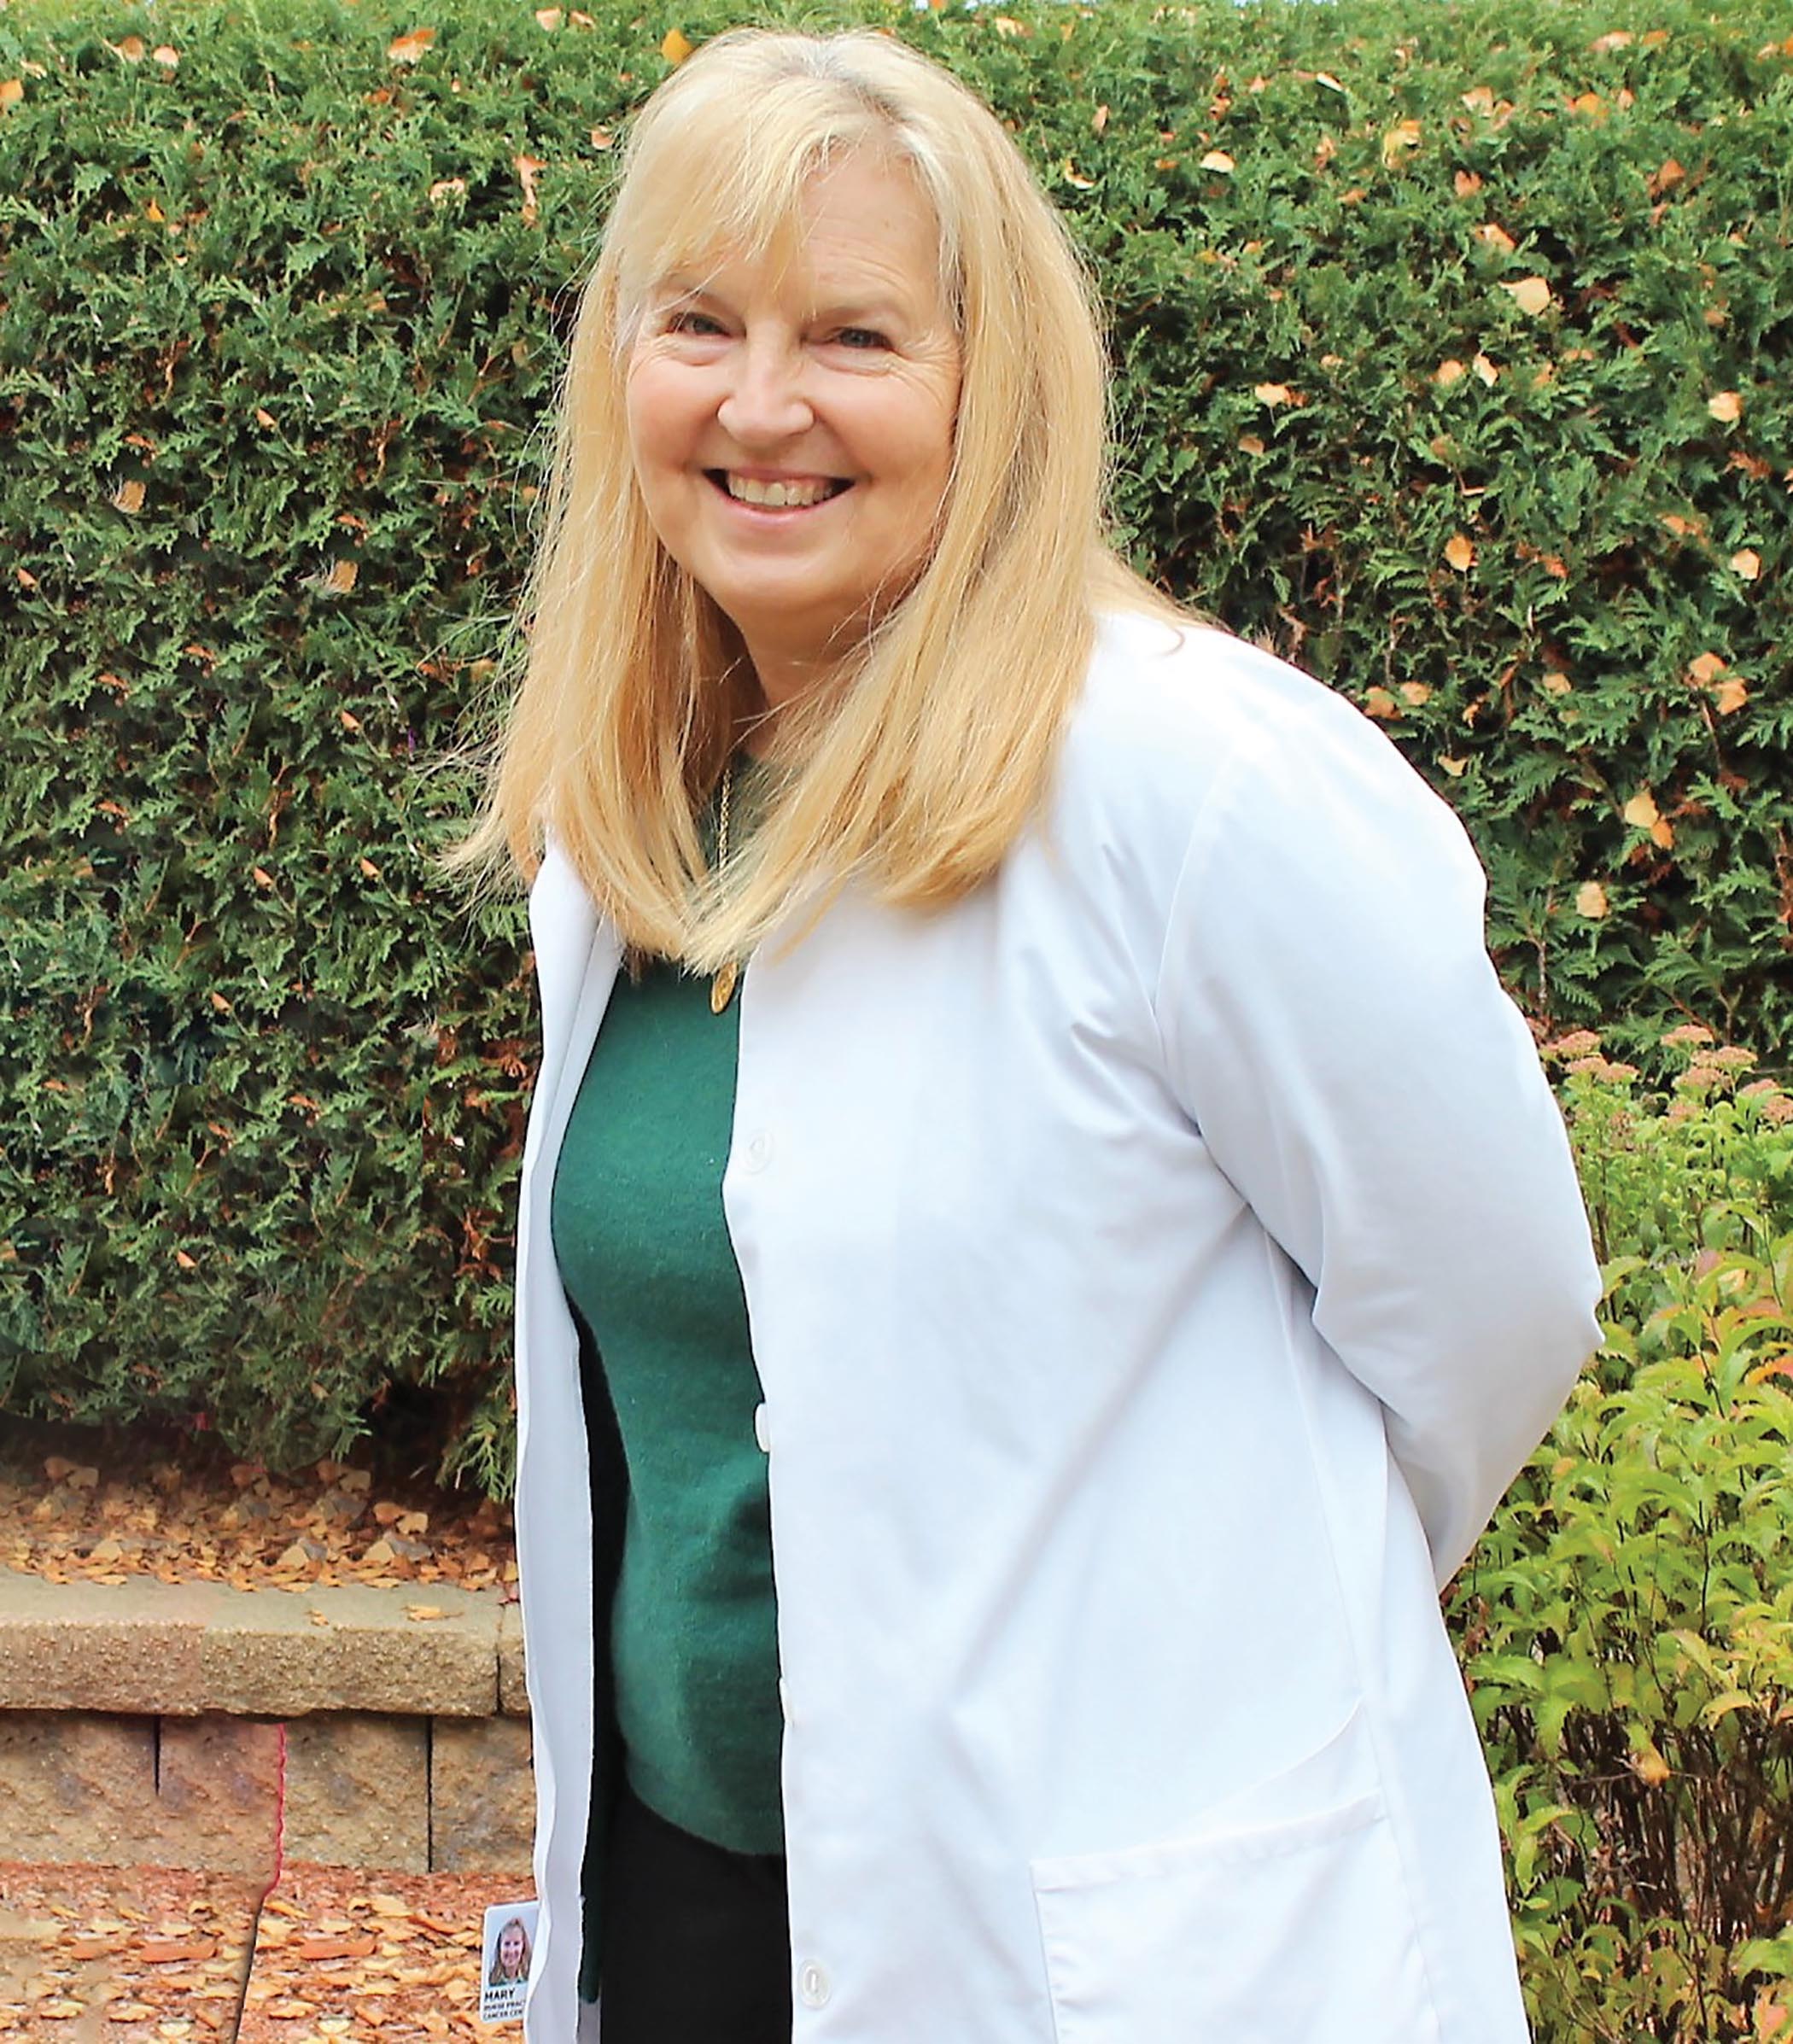 ONS member Mary Schmitt, MS, FNP-BC, APRN, AOCNP®